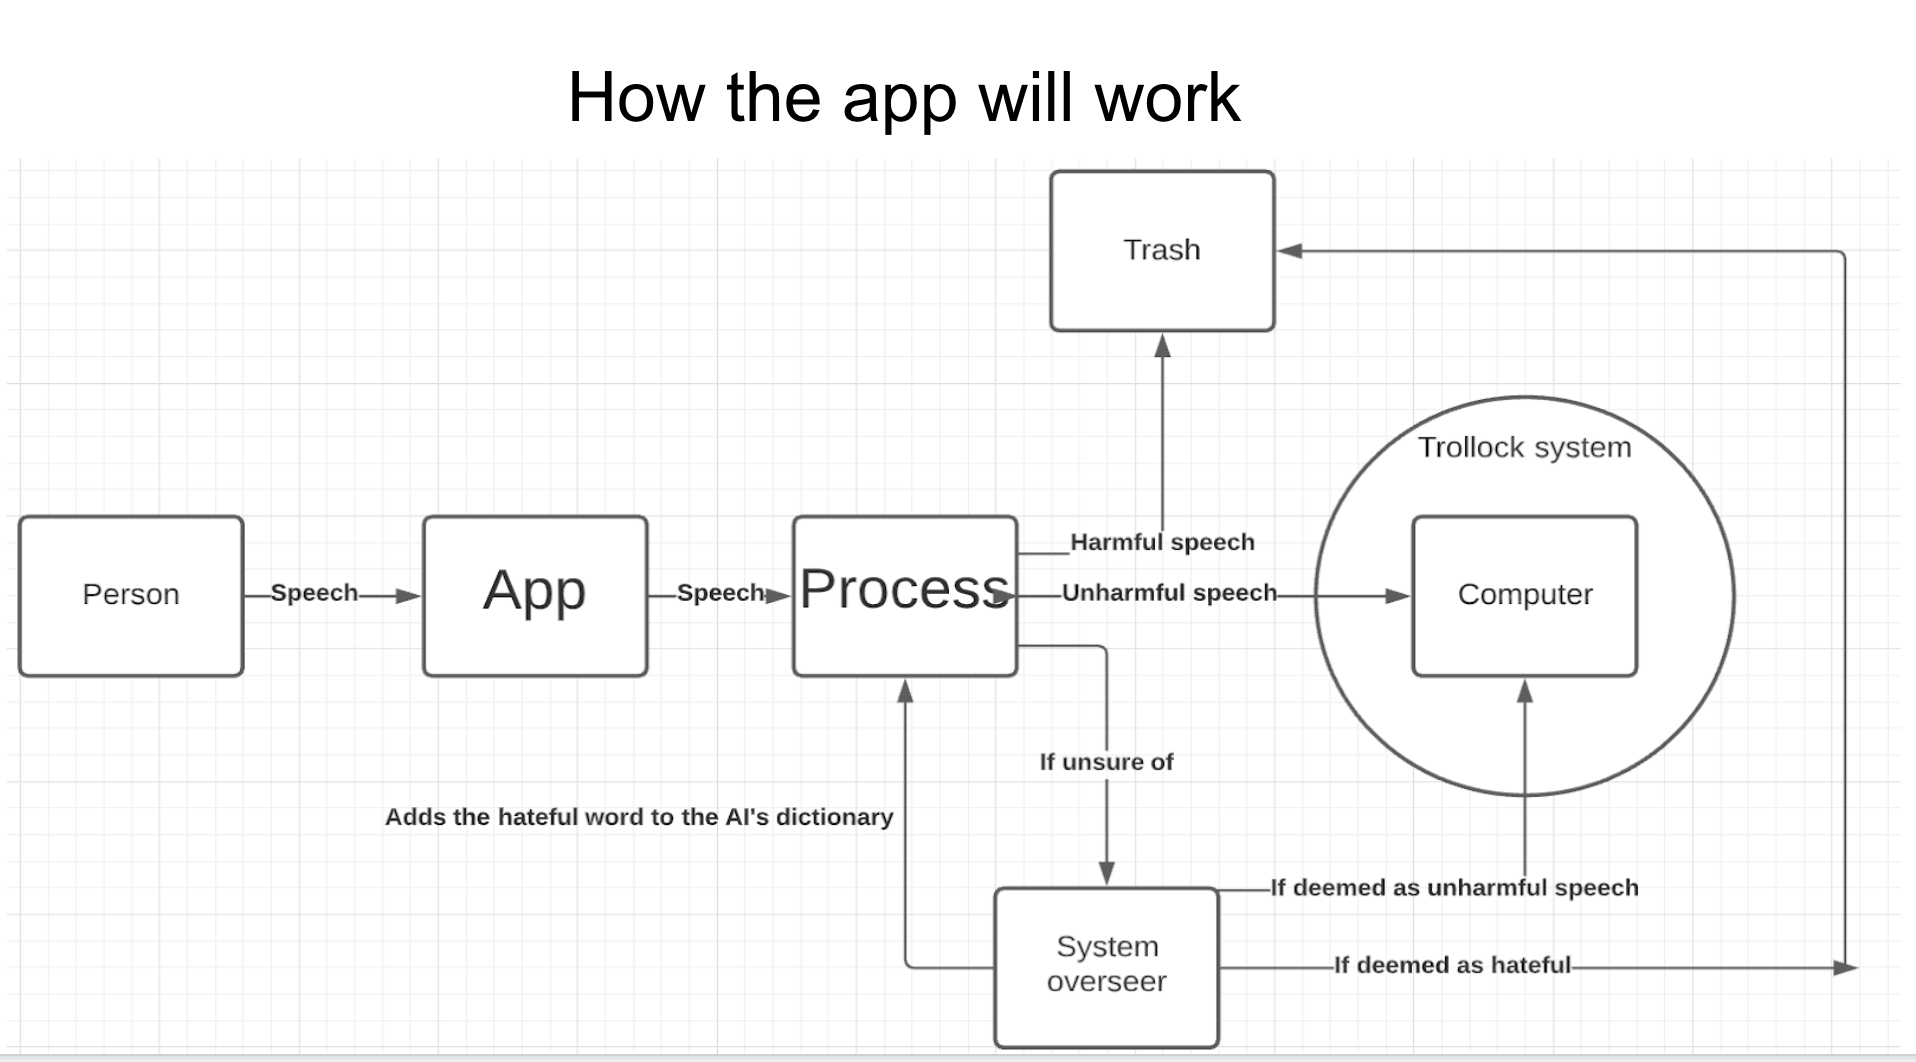 How the app works